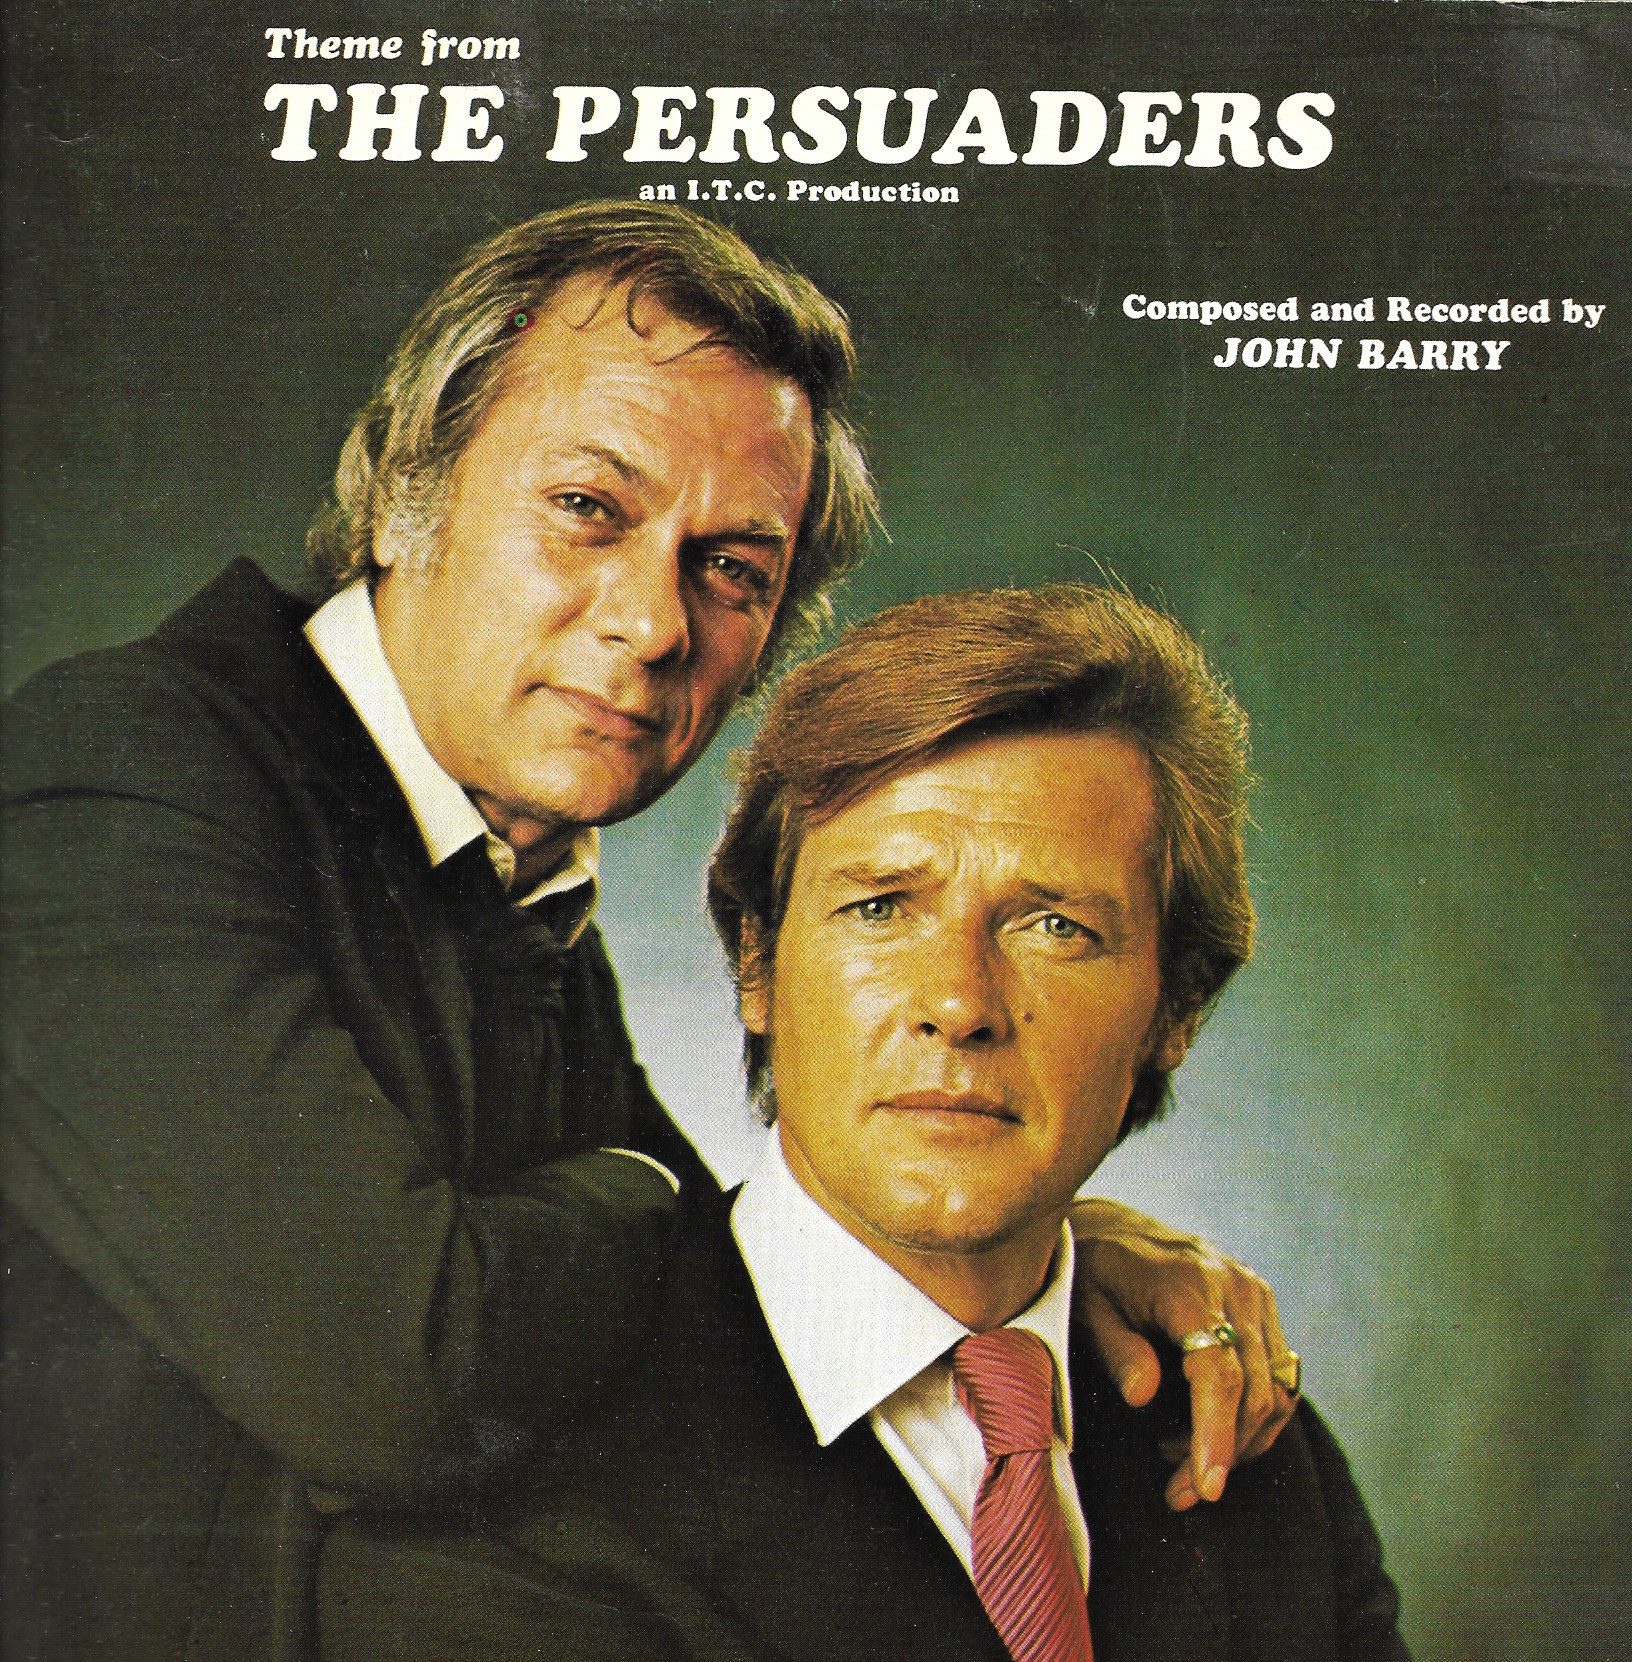 Jon Burlingame on Twitter: "John Barry's "Persuaders" theme, first heard in  America with the series debut 50 years ago tonight. Still one of the  all-time great TV themes. https://t.co/qlkSmcAGis" / Twitter